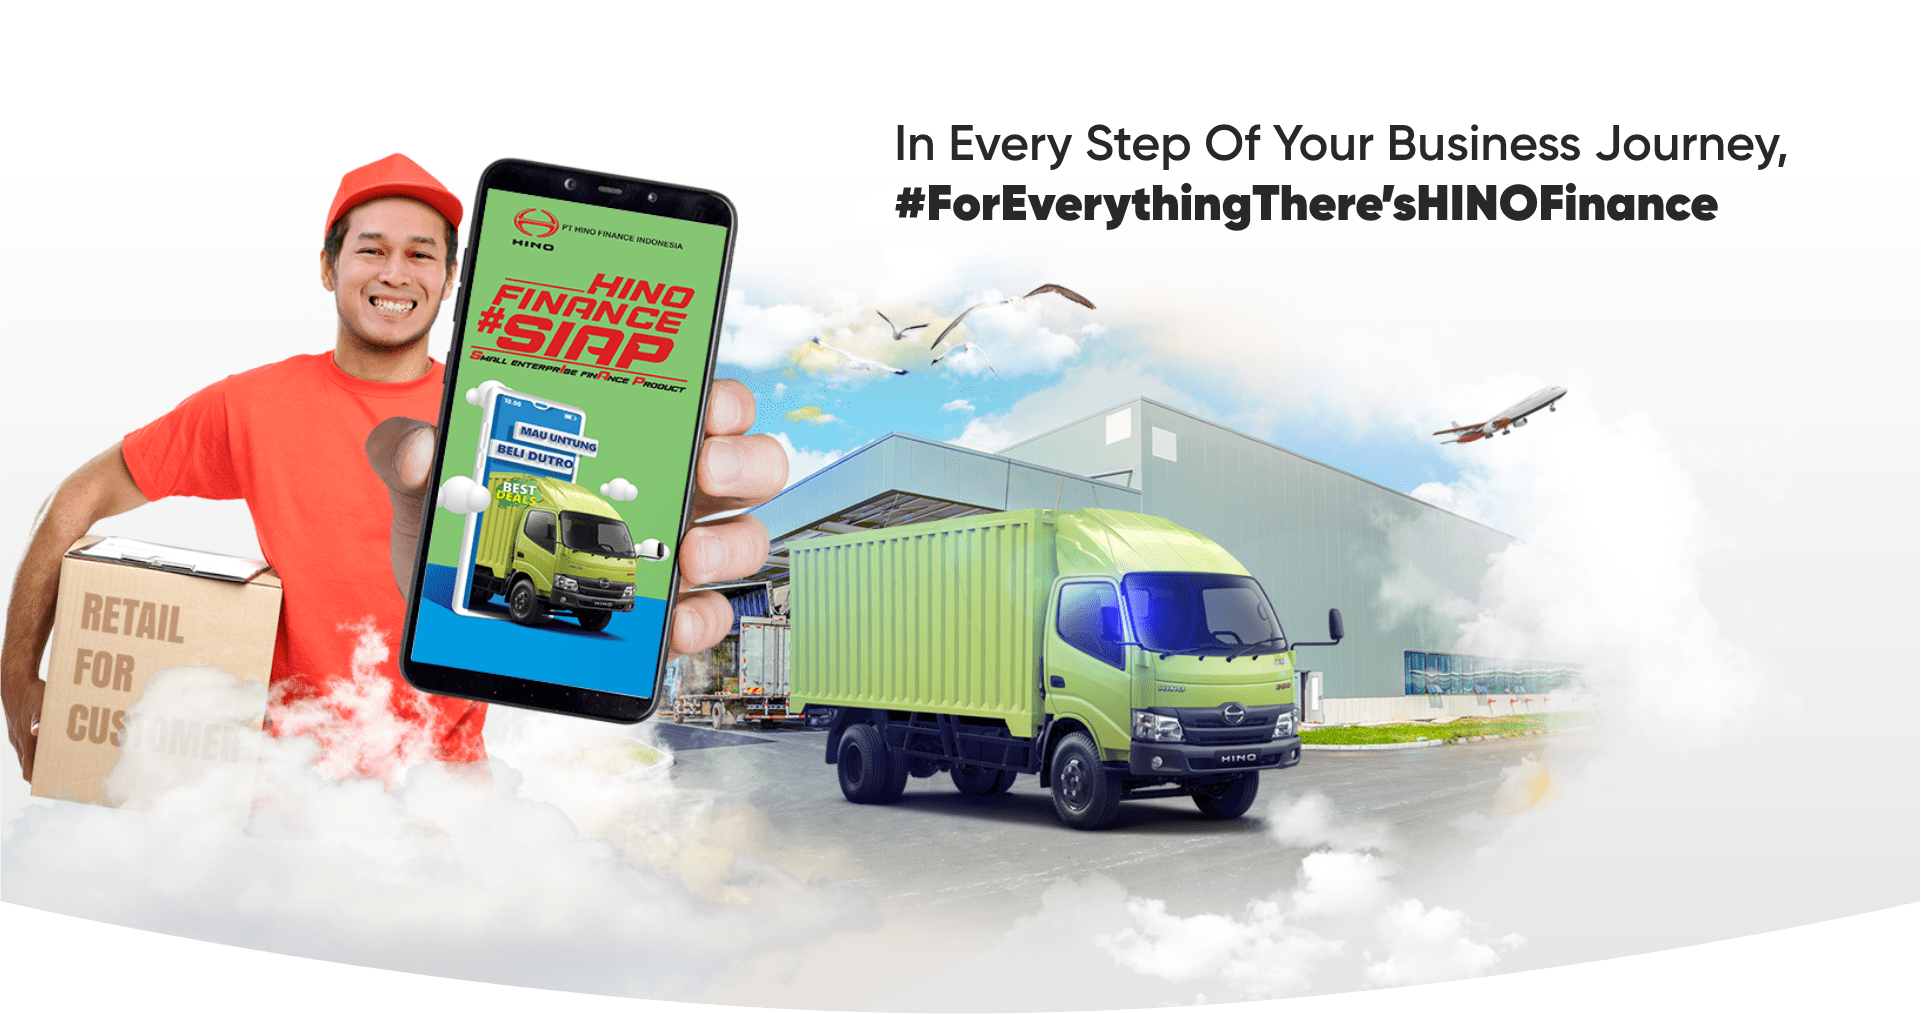 In Every Step of Your Business Journey, #Foreverythingthere'sHINOfinance